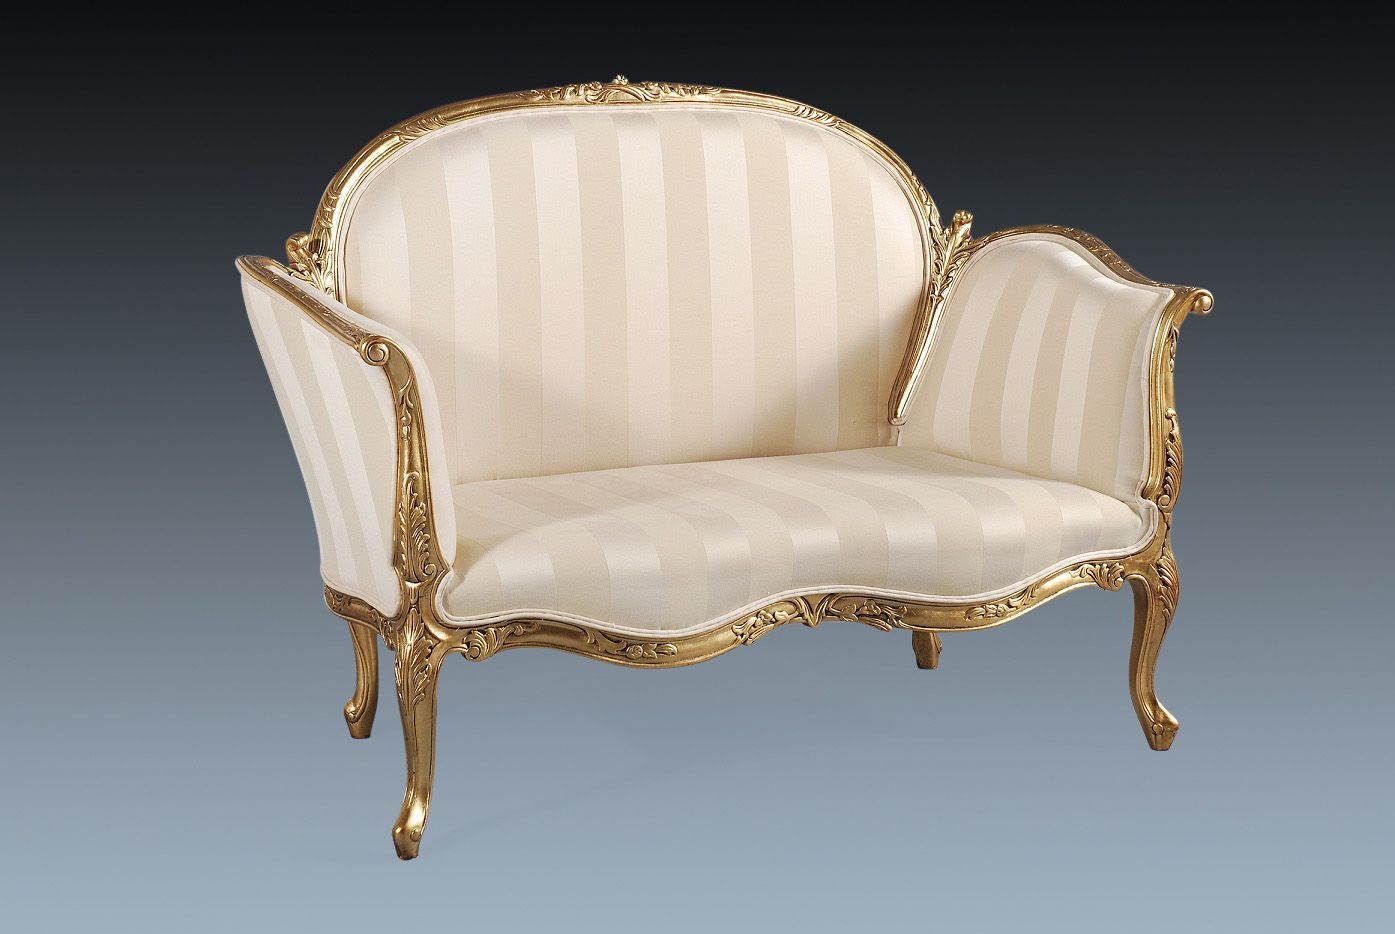 Josephine Sofa – The French Furniture Company | Inspiration In Josephine Sofa Chairs (View 8 of 25)